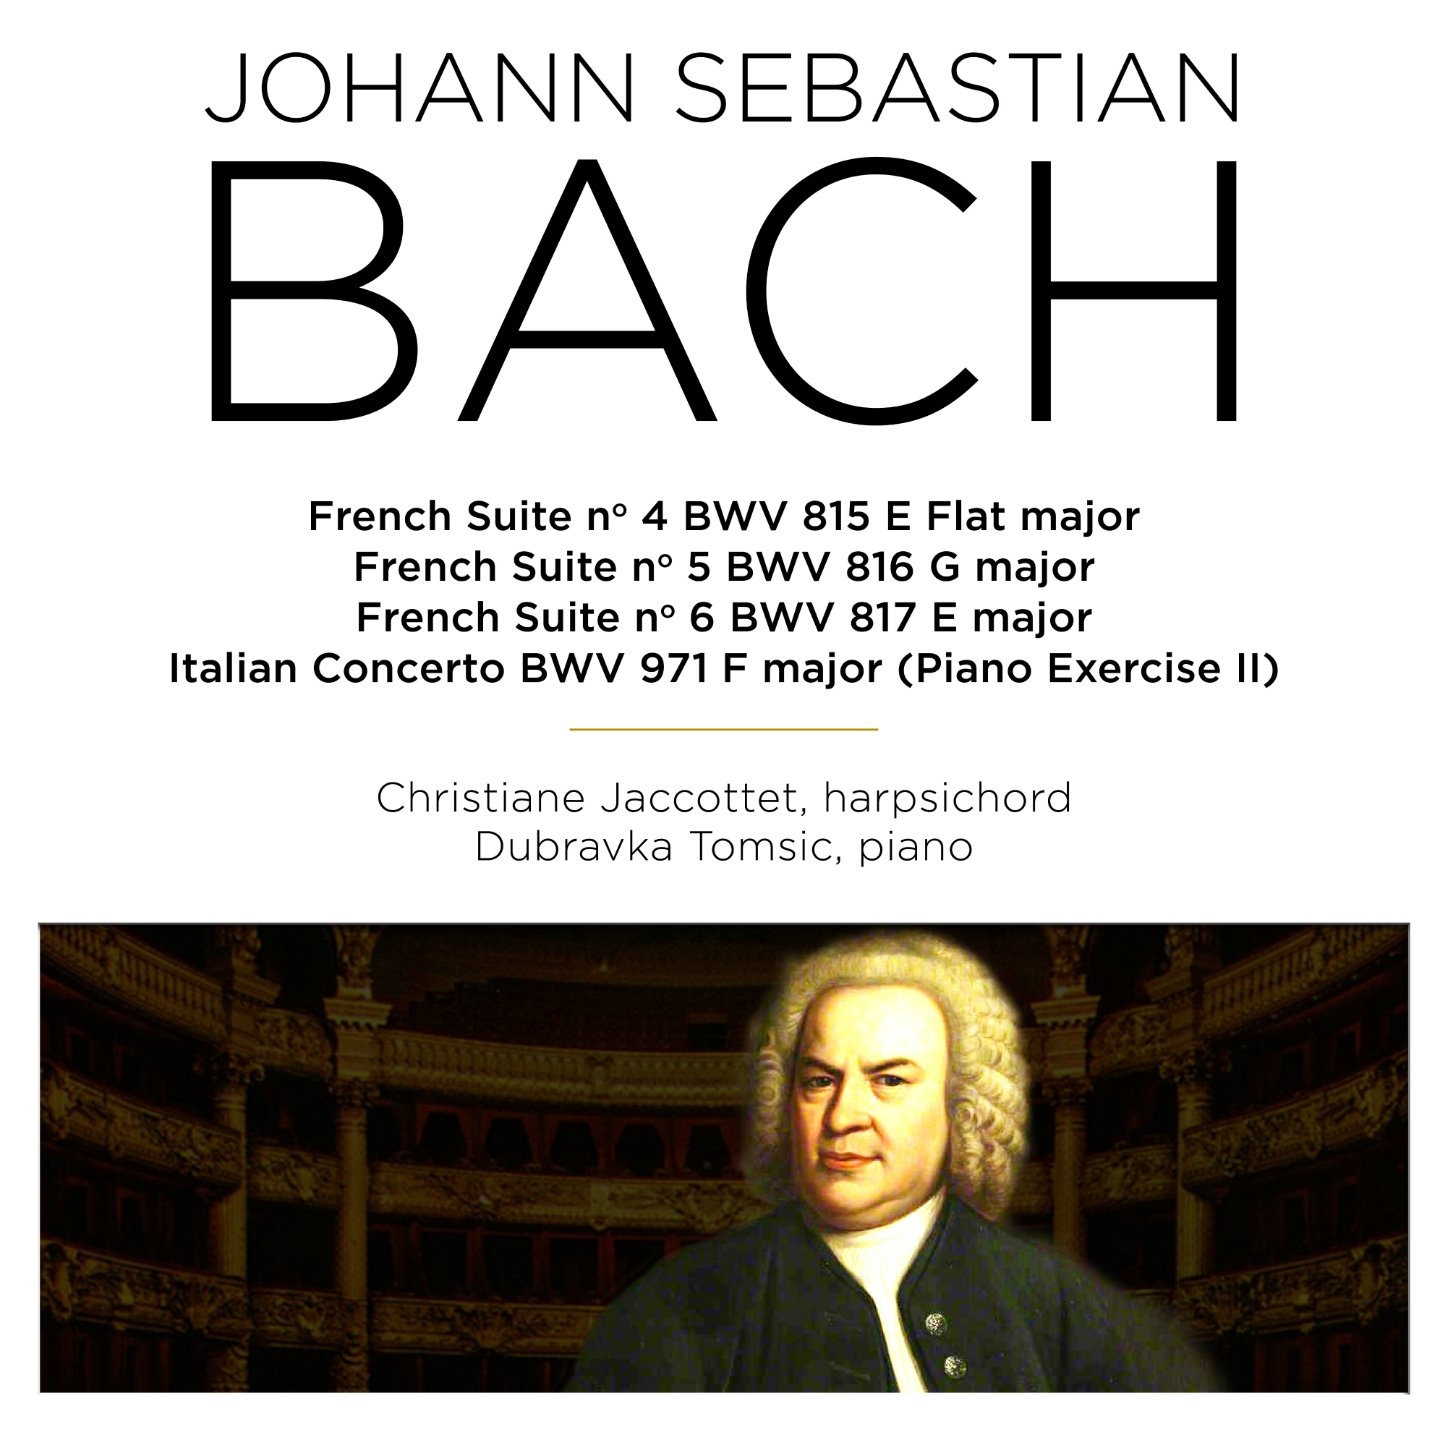 French Suite No. 5 in G Major, BWV 816: V. Bourre e